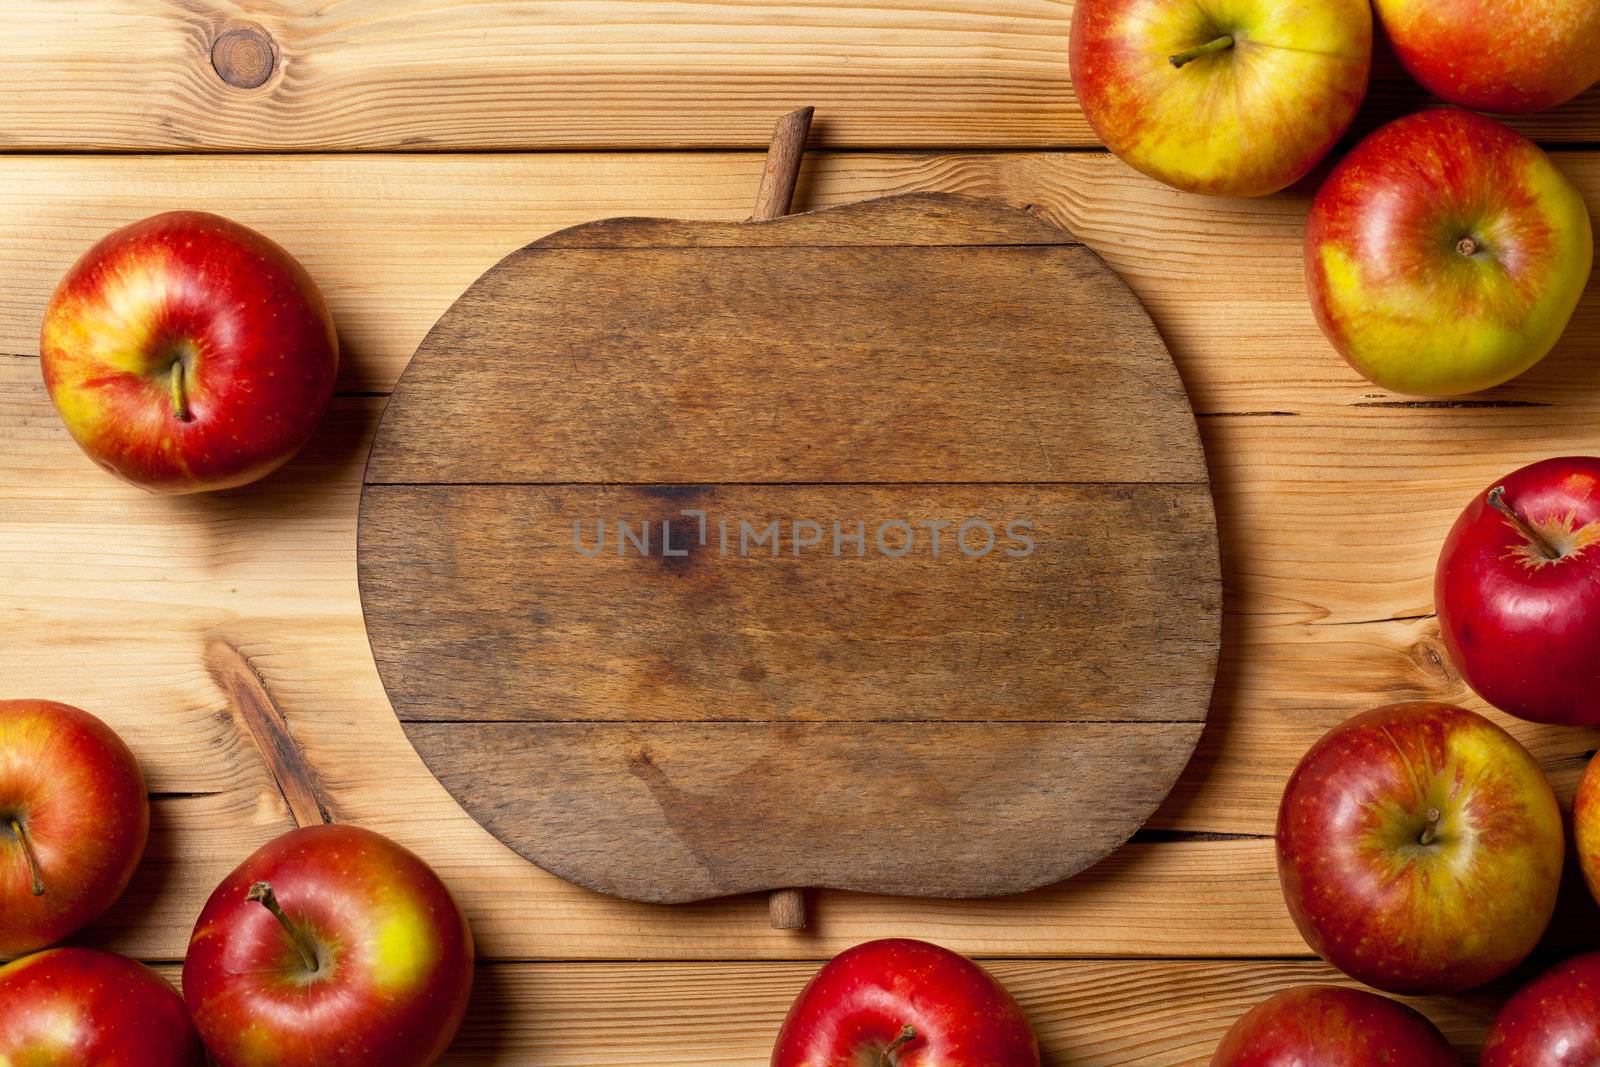 Fresh apples on wooden table. Composition with fruits and cutting board with apple shape. Copy space